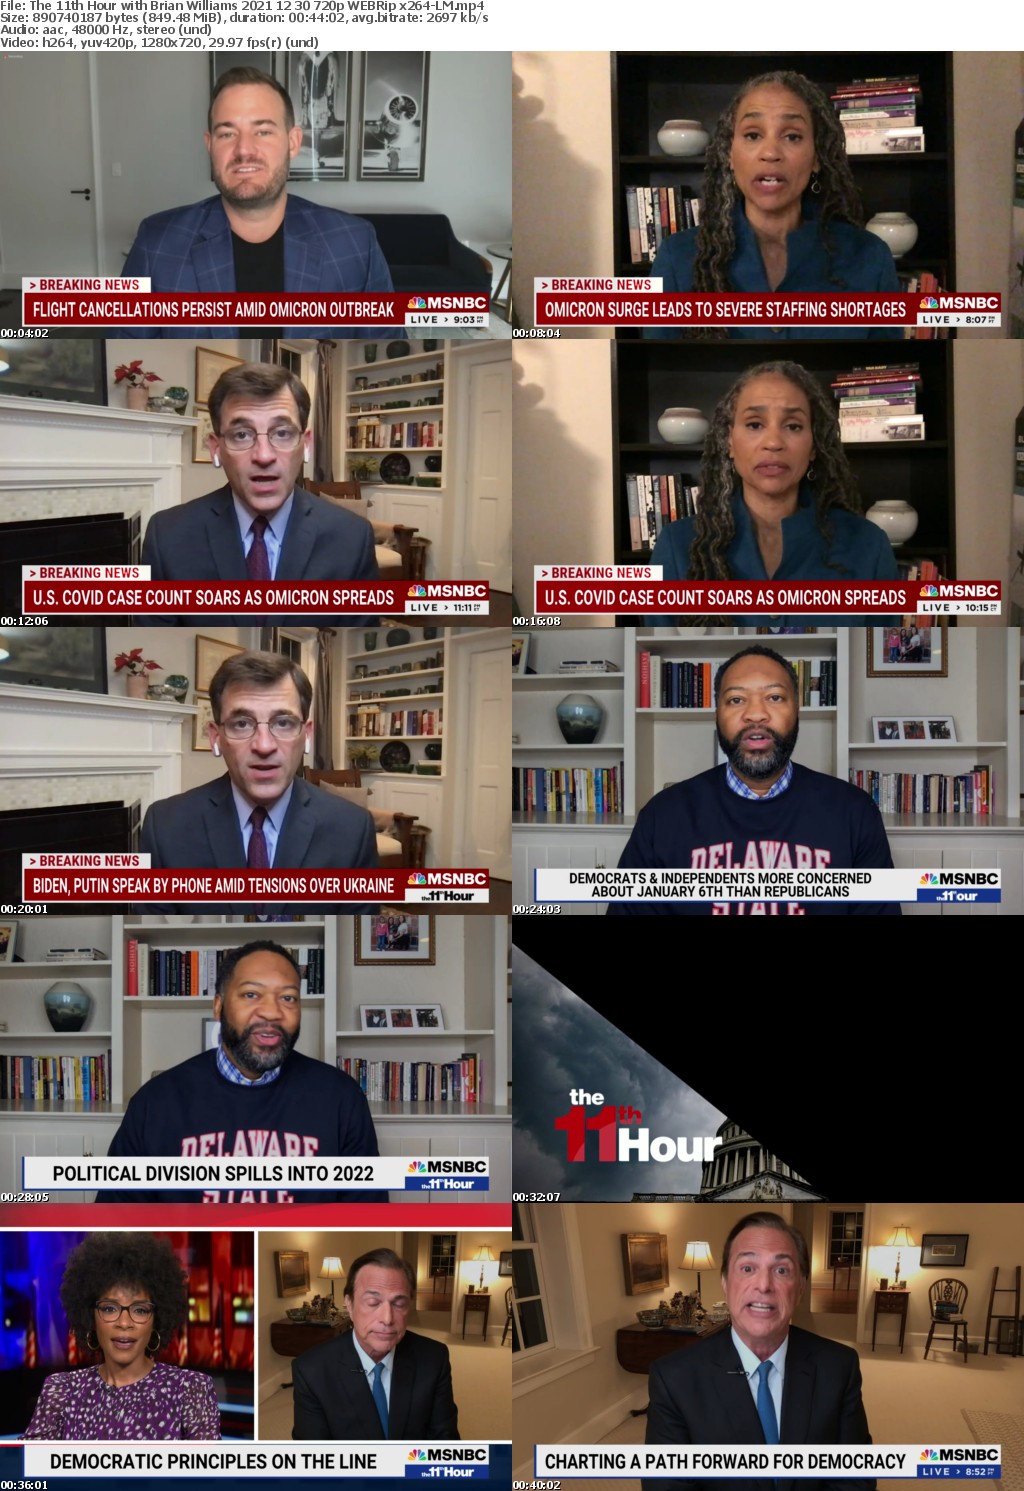 The 11th Hour with Brian Williams 2021 12 30 720p WEBRip x264-LM